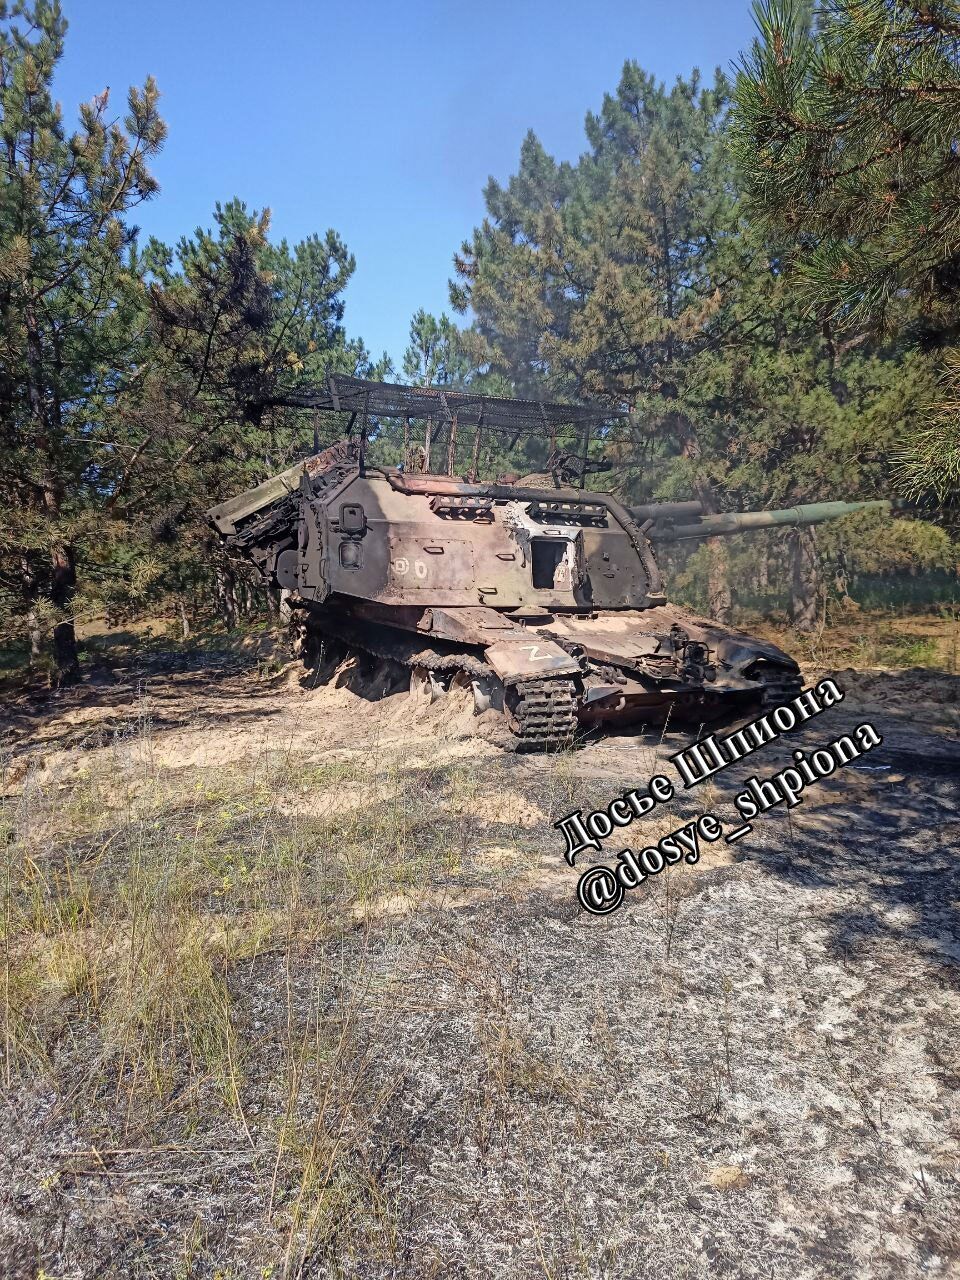 The occupiers burned their own Msta-S self-propelled artillery system and said it caught fire on its own. Photo